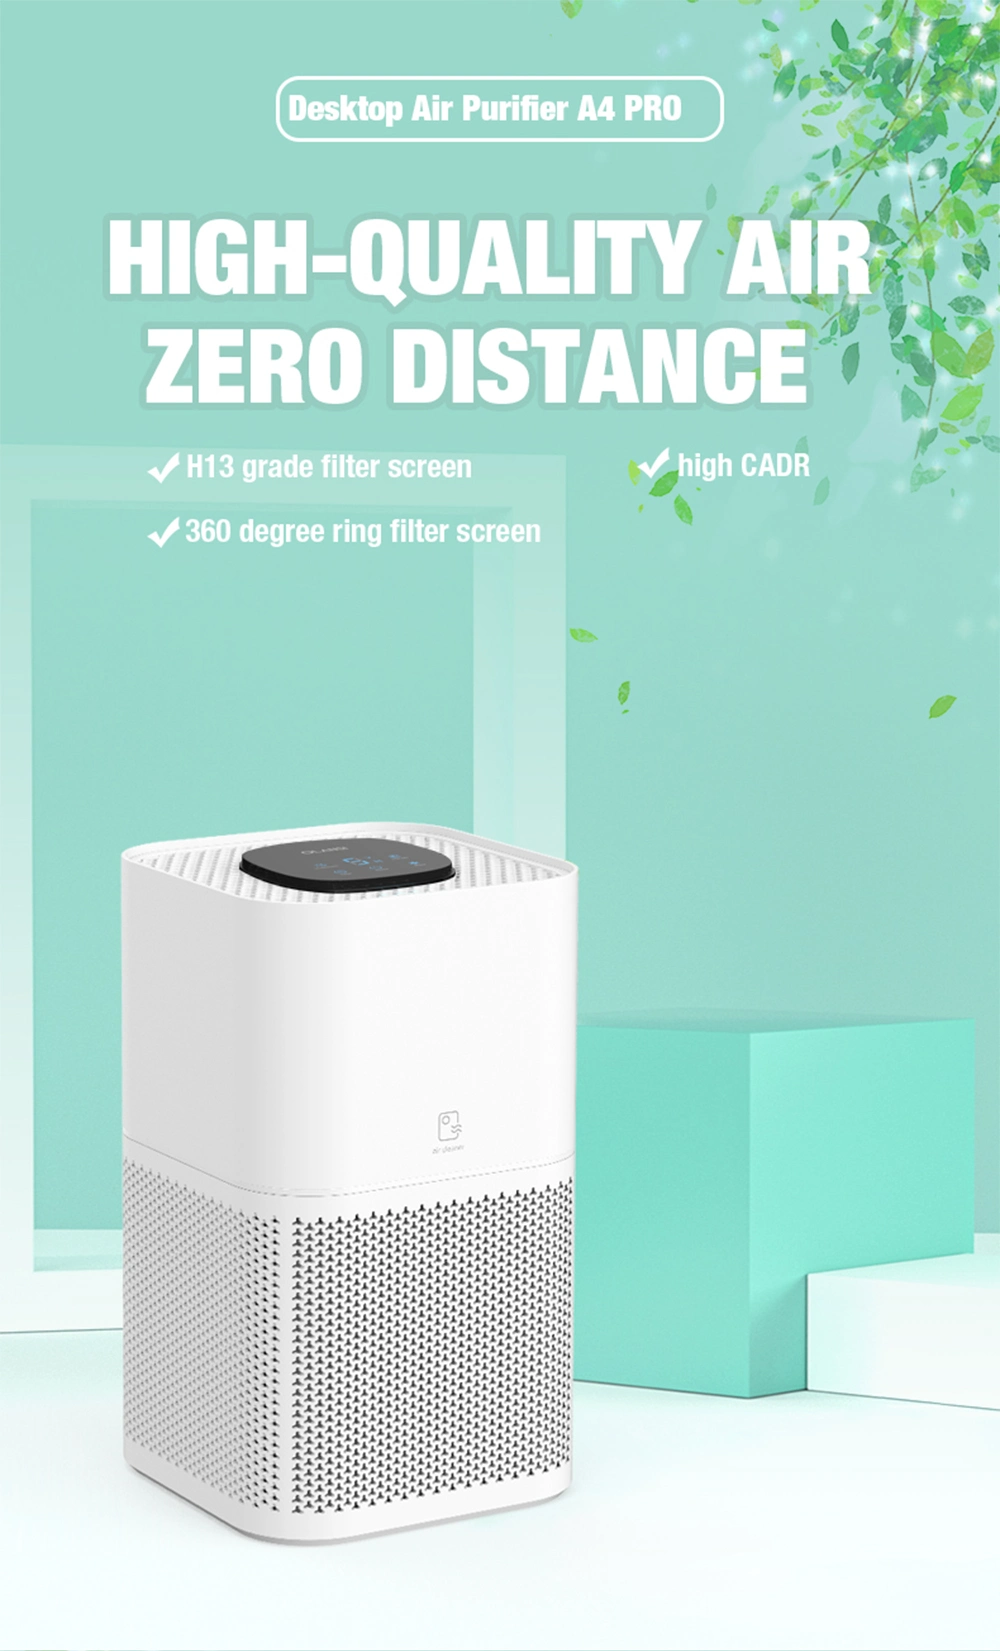 Portable HEPA Filter Air Purifier for Home and Commercial Use